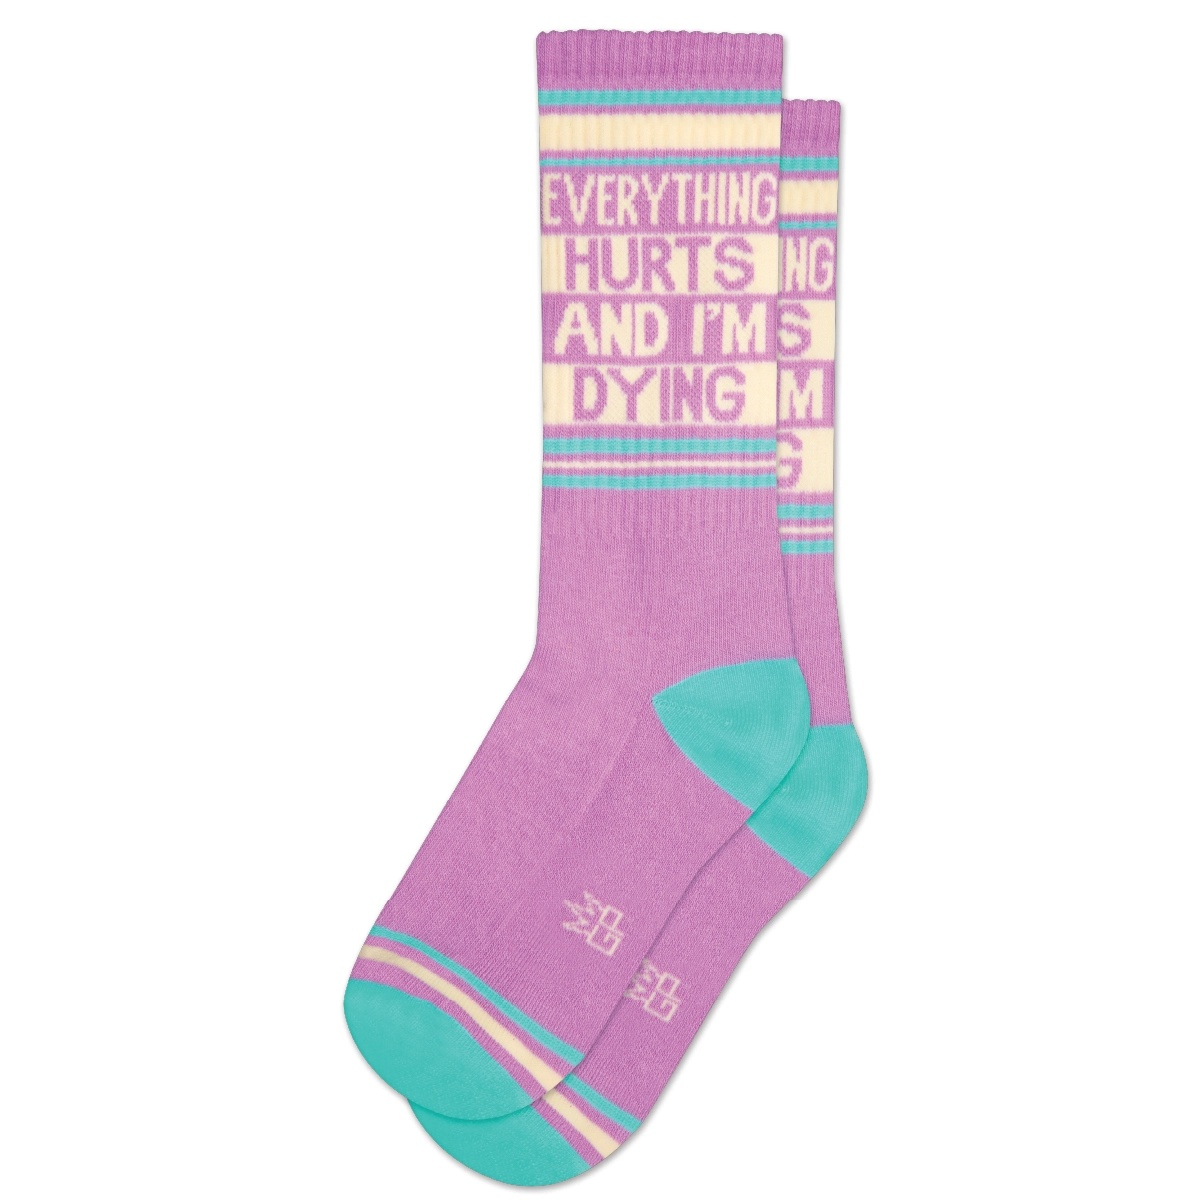 Gumball Poodle "Everything Hurts and I'm Dying" Socks